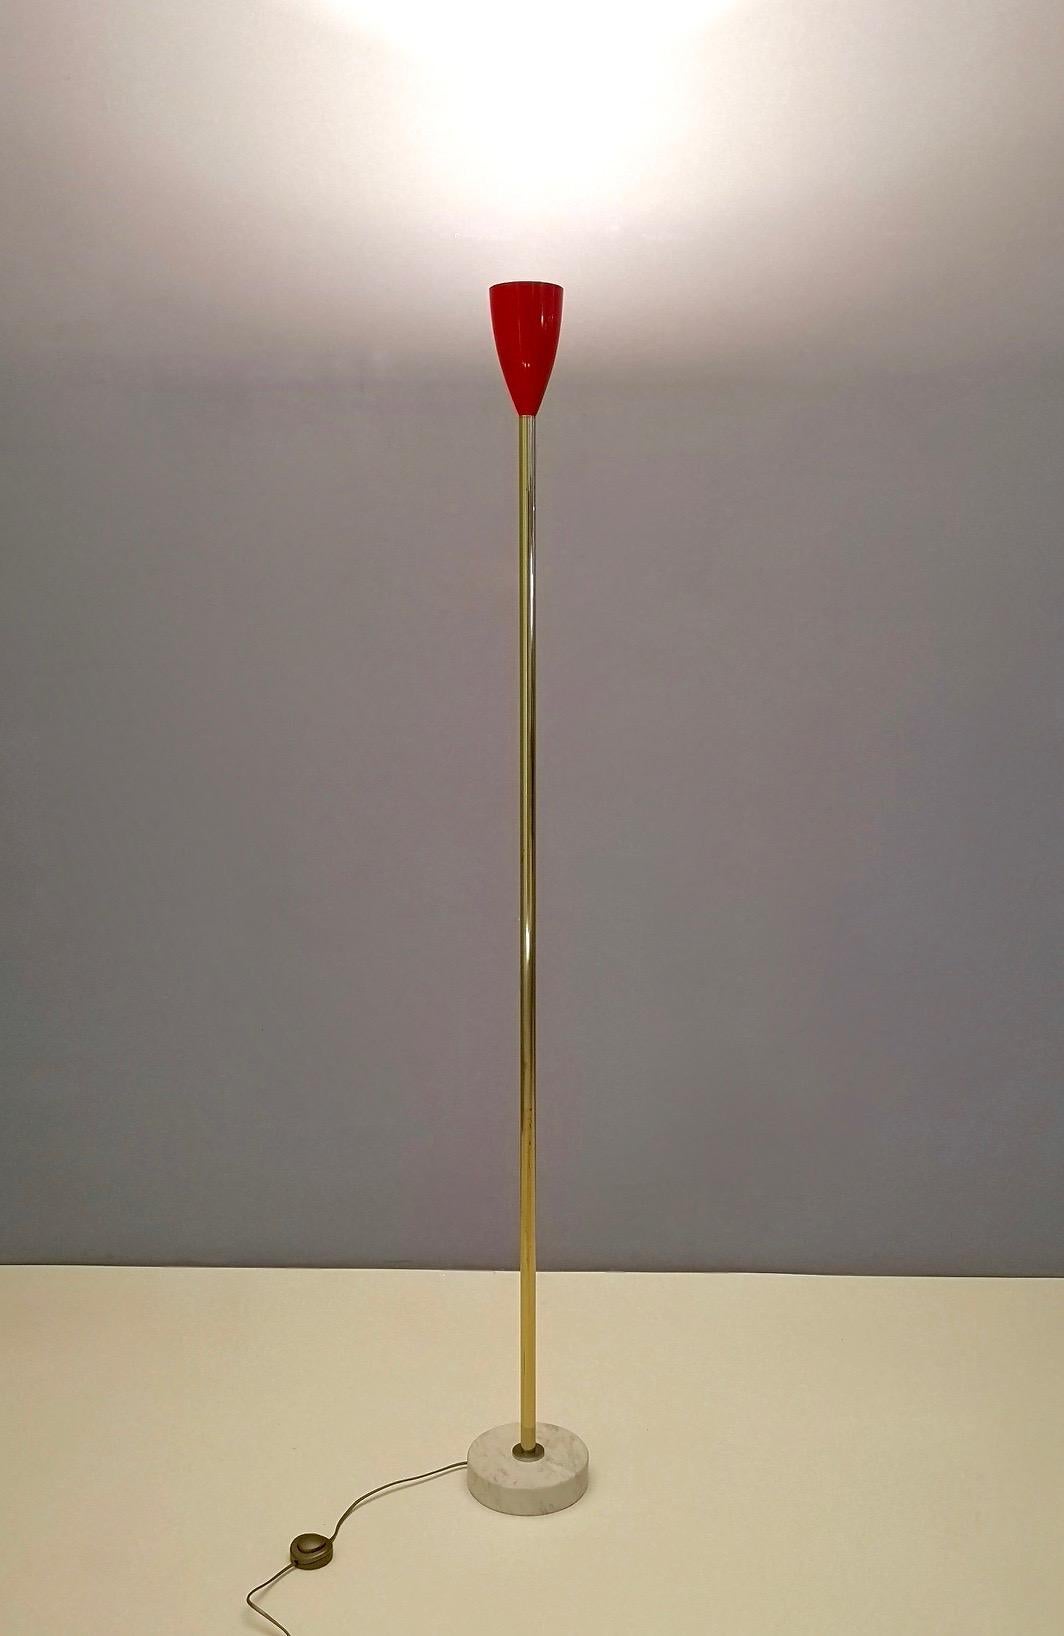 This floor lamp is made in brass, steel, and features a Carrara marble base and a red varnished aluminum lampshade. 
It might show slight traces of use, but it can be considered as in very good original condition and ready to give ambiance to any